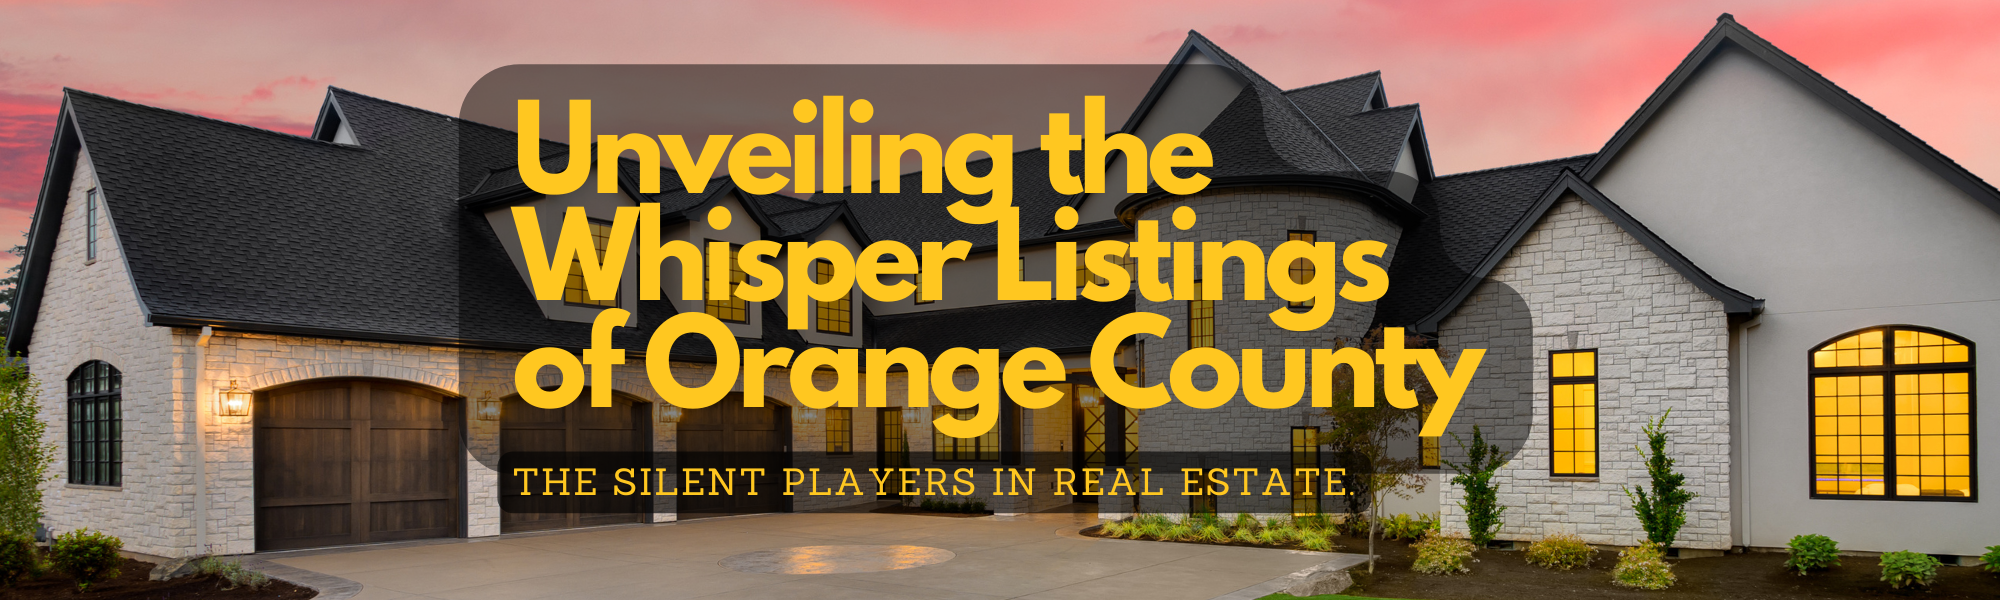 Reveling in the Secrets of Orange County Real Estate - An Introduction to  Whisper Listings